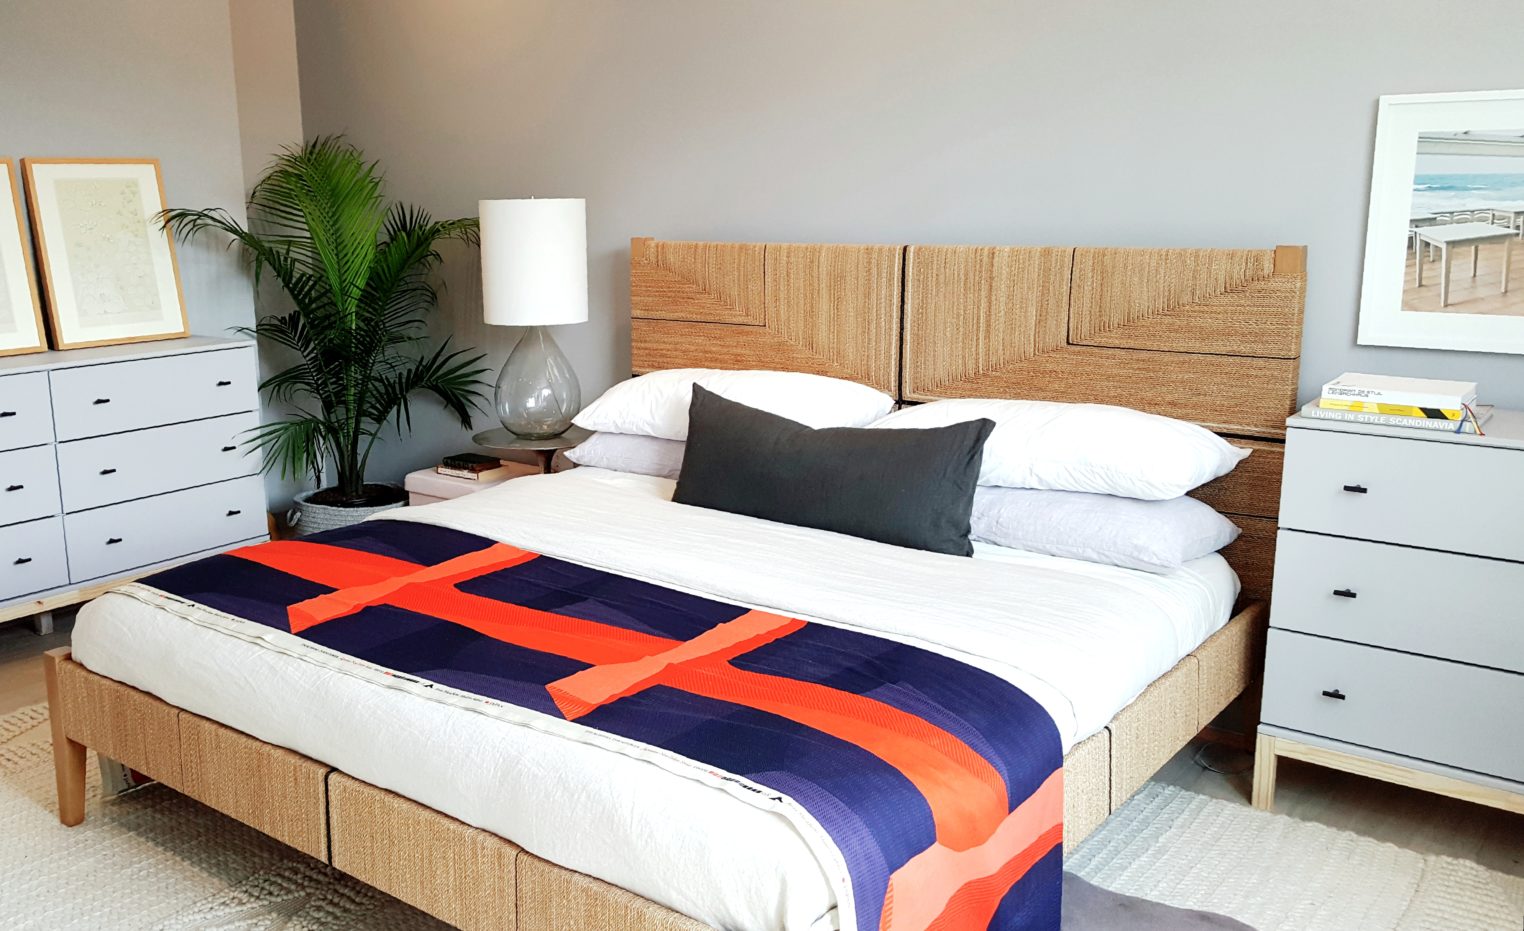 Modern bedrooms on the 2019 Modern Home Tour. See details on the Pillow Goddess Blog.